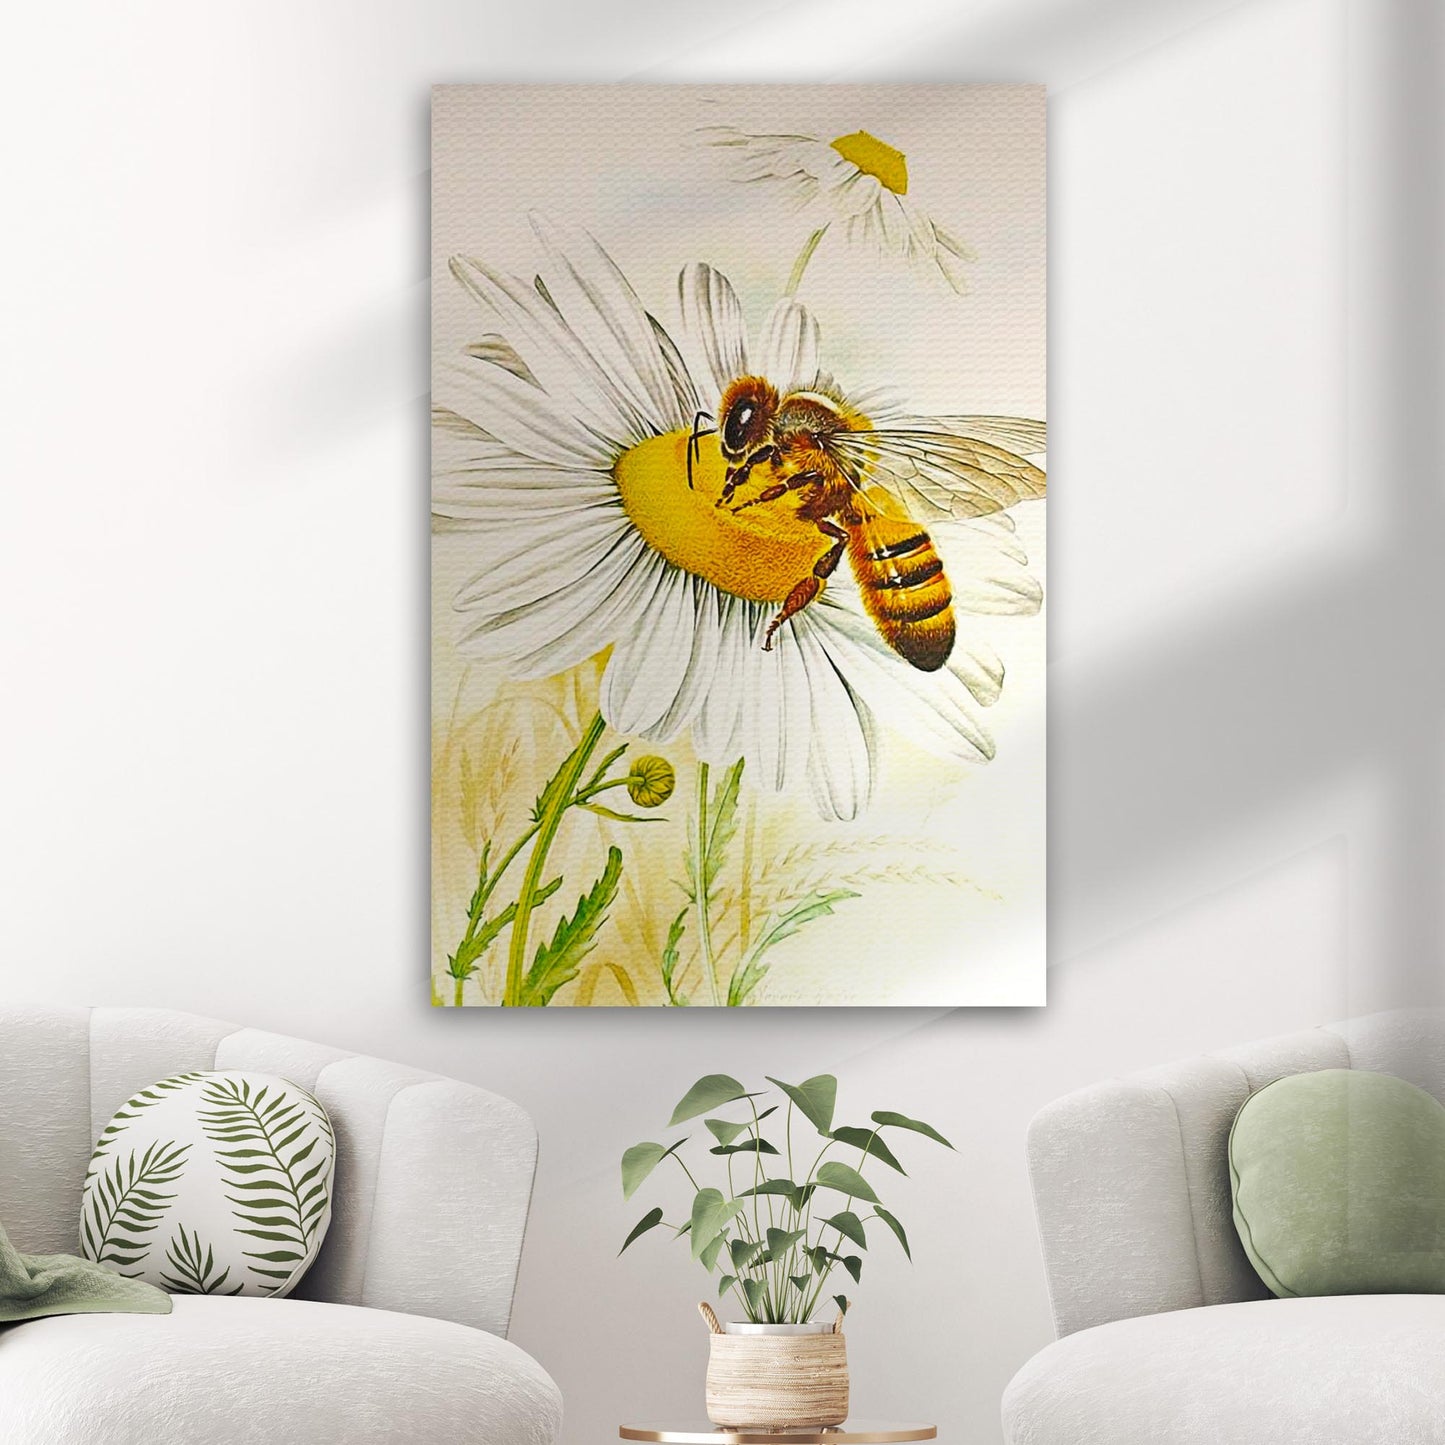 Collecting Nectar Canvas Wall Art - Image by Tailored Canvases